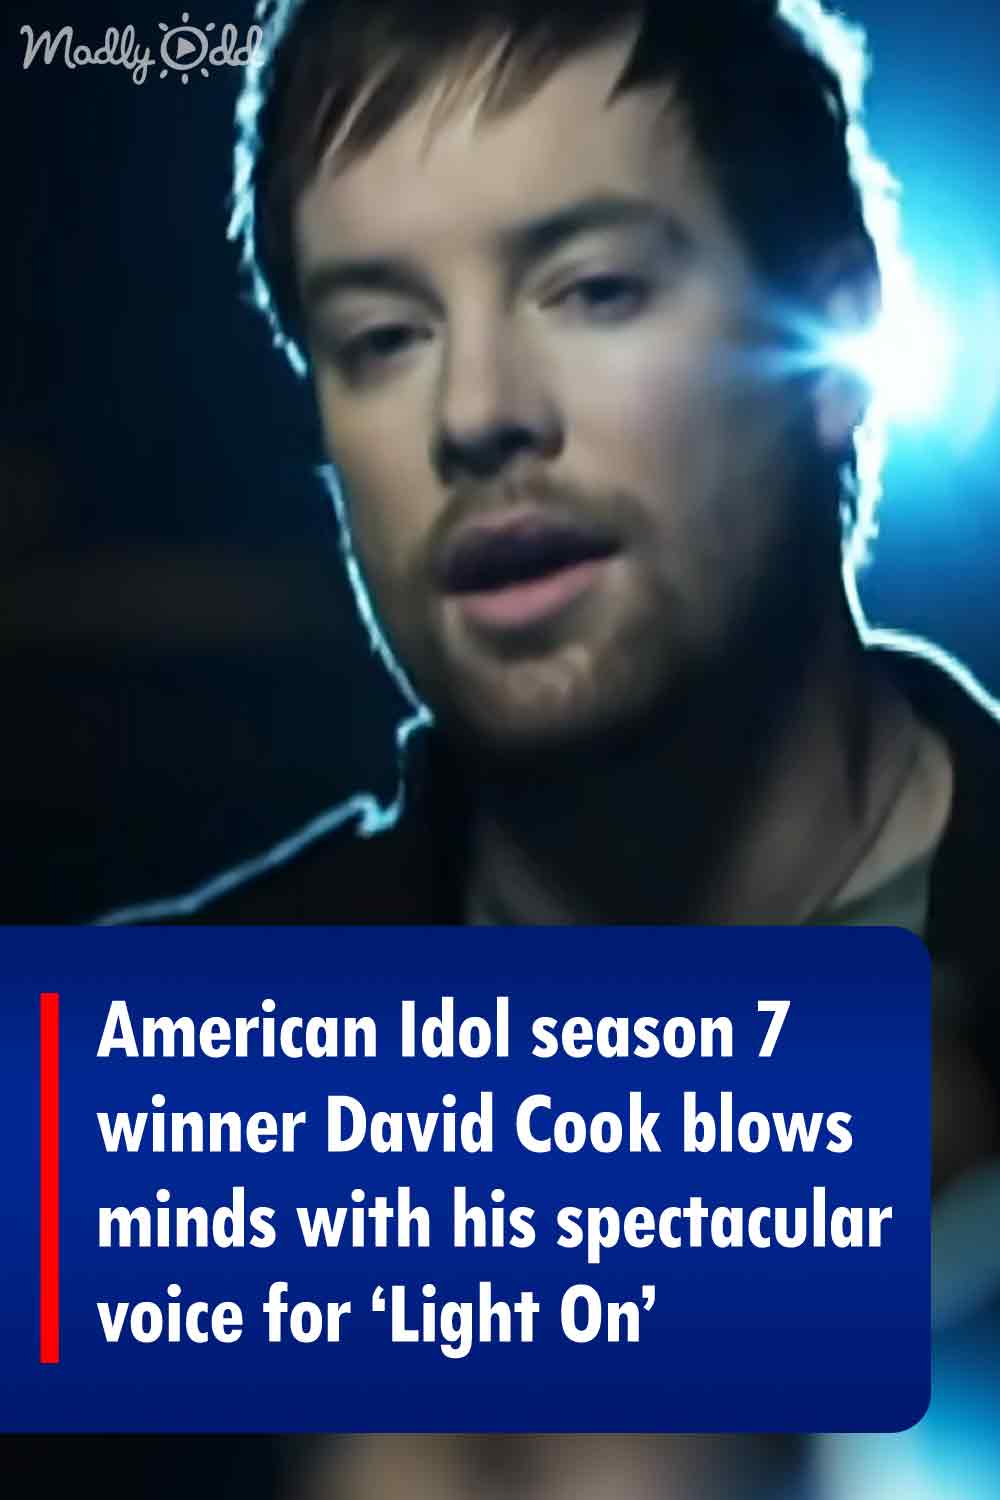 American Idol season 7 winner David Cook blows minds with his spectacular voice for ‘Light On’